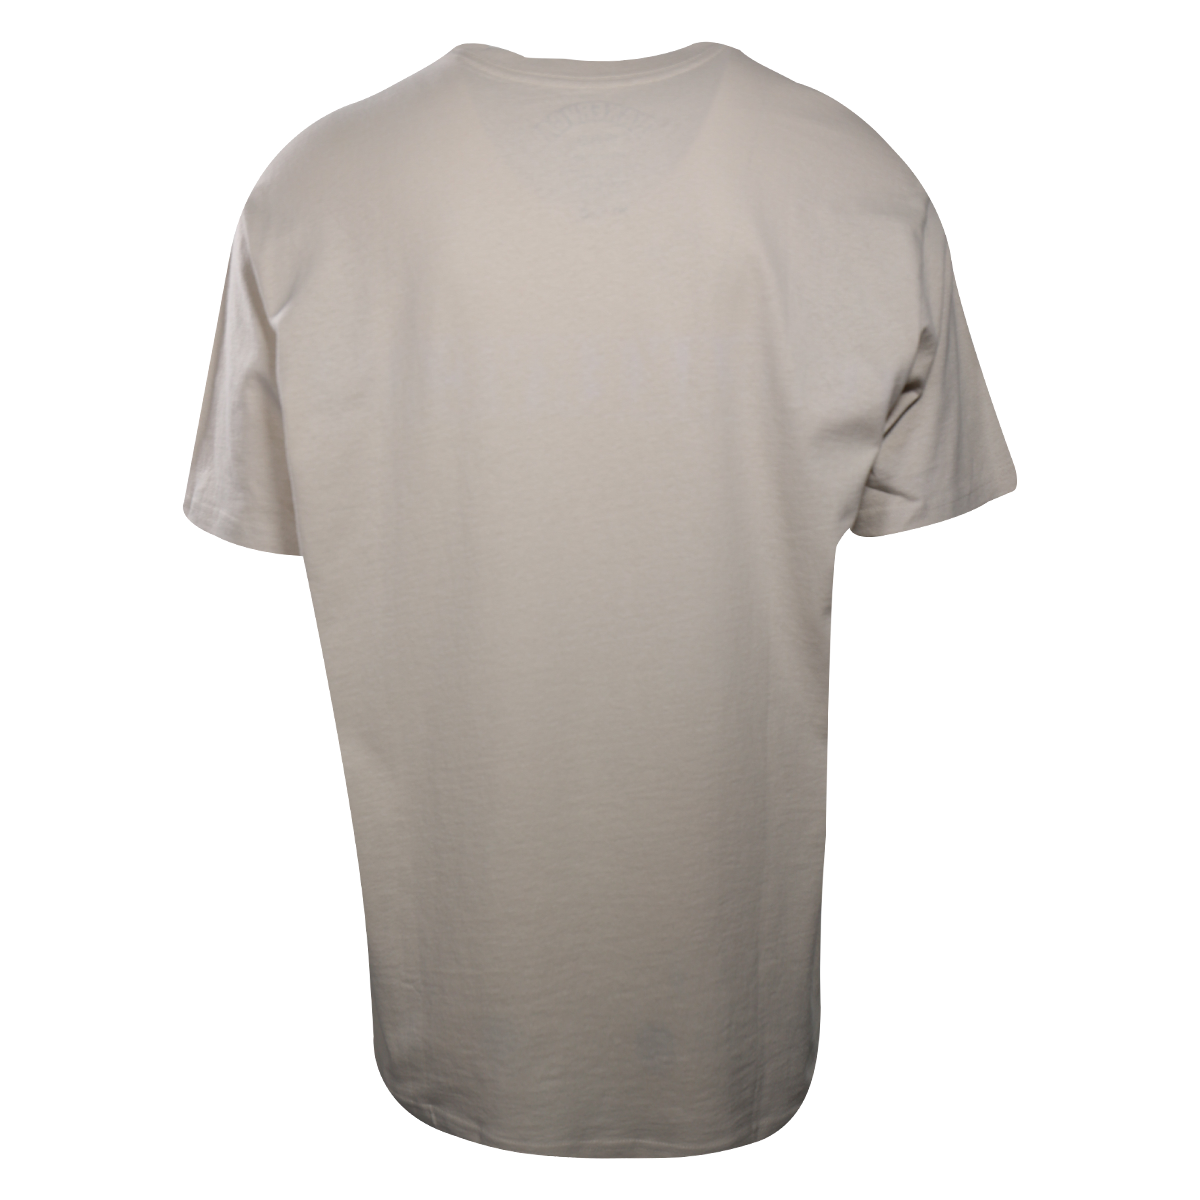 RVCA Men's Stone Beige Ransom BAKERVCA Relaxed Fit S/S T-Shirt (S06)